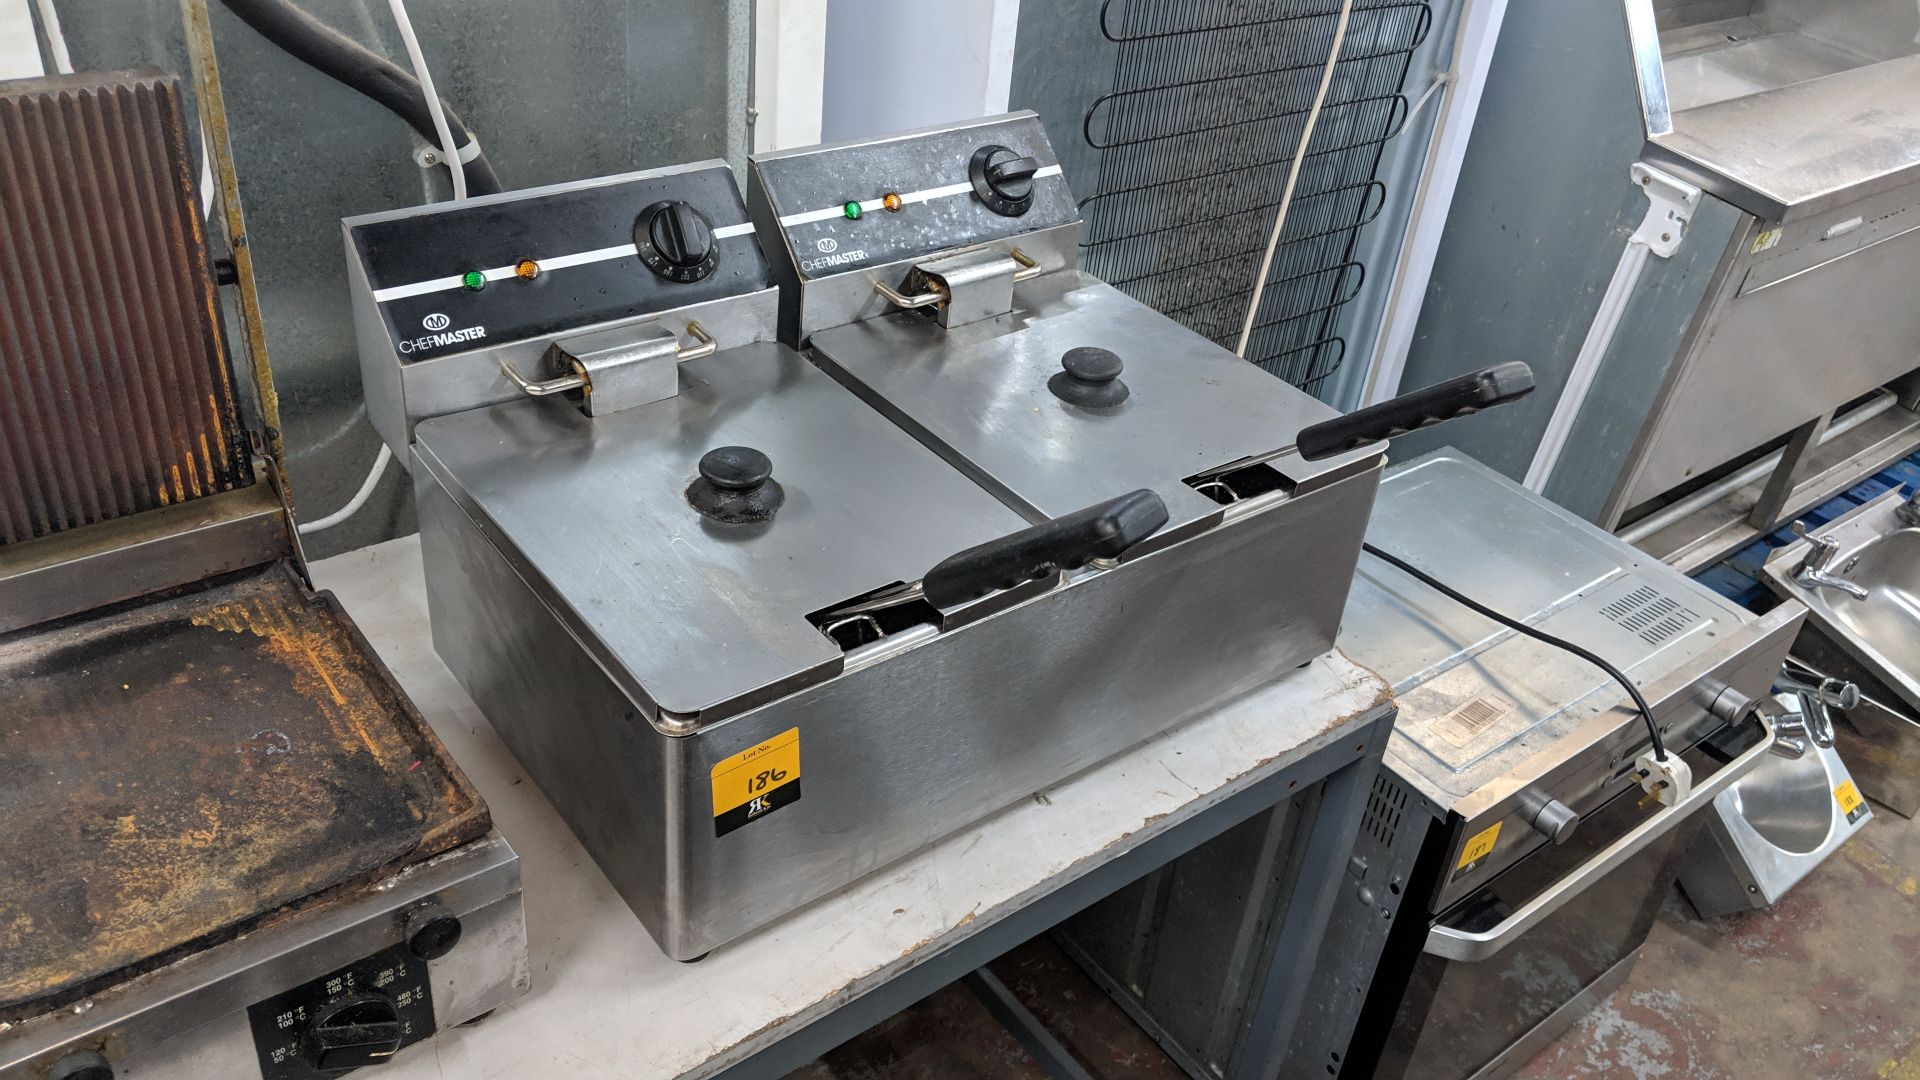 Chefmaster benchtop stainless steel twin deep fat fryer IMPORTANT: Please remember goods